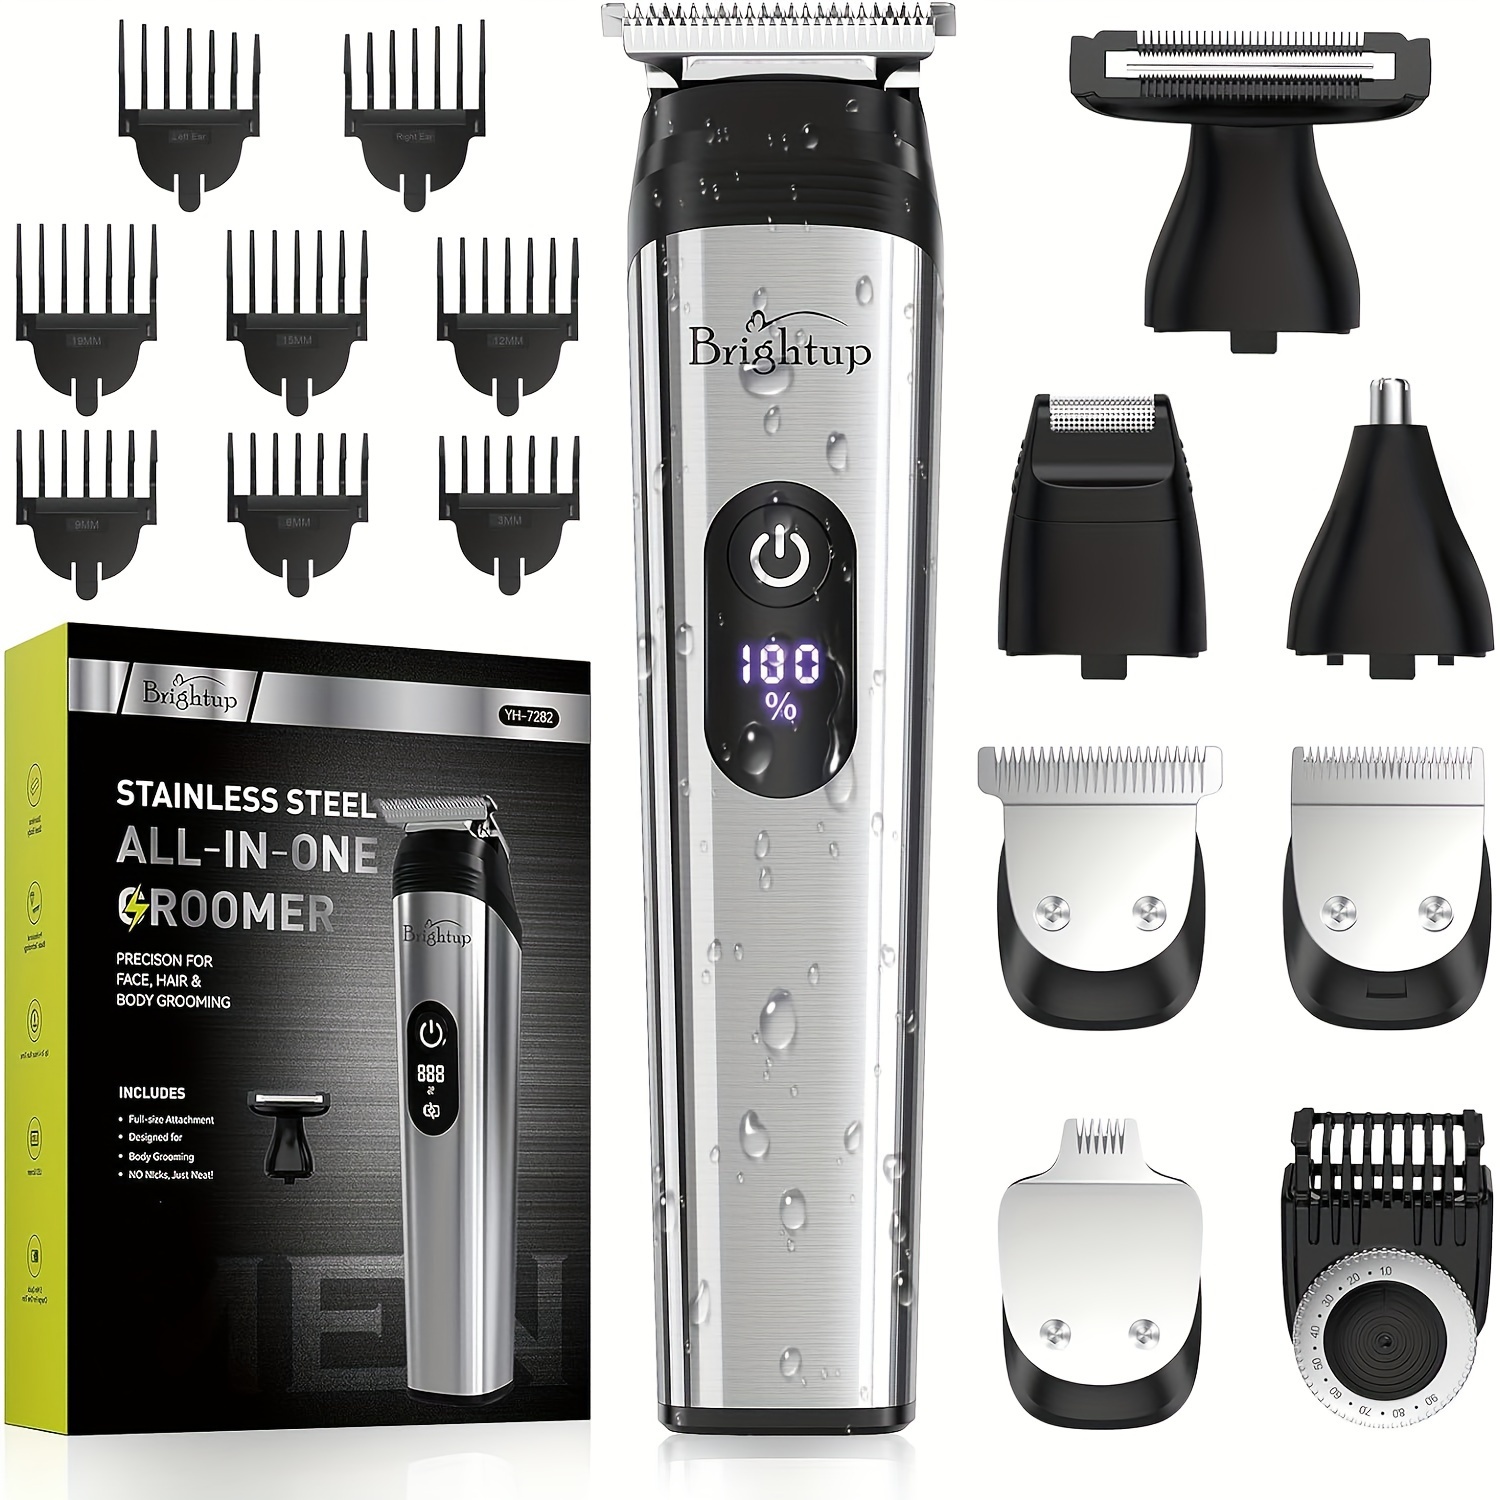 

22 Piece Beard Grooming Kit With Hair Clippers, Beard Trimmer For Men, Wet/dry Electric Razor, Waterproof Nose Hair Trimmer, Mens Body Shaver, Anniversary Birthday Gifts